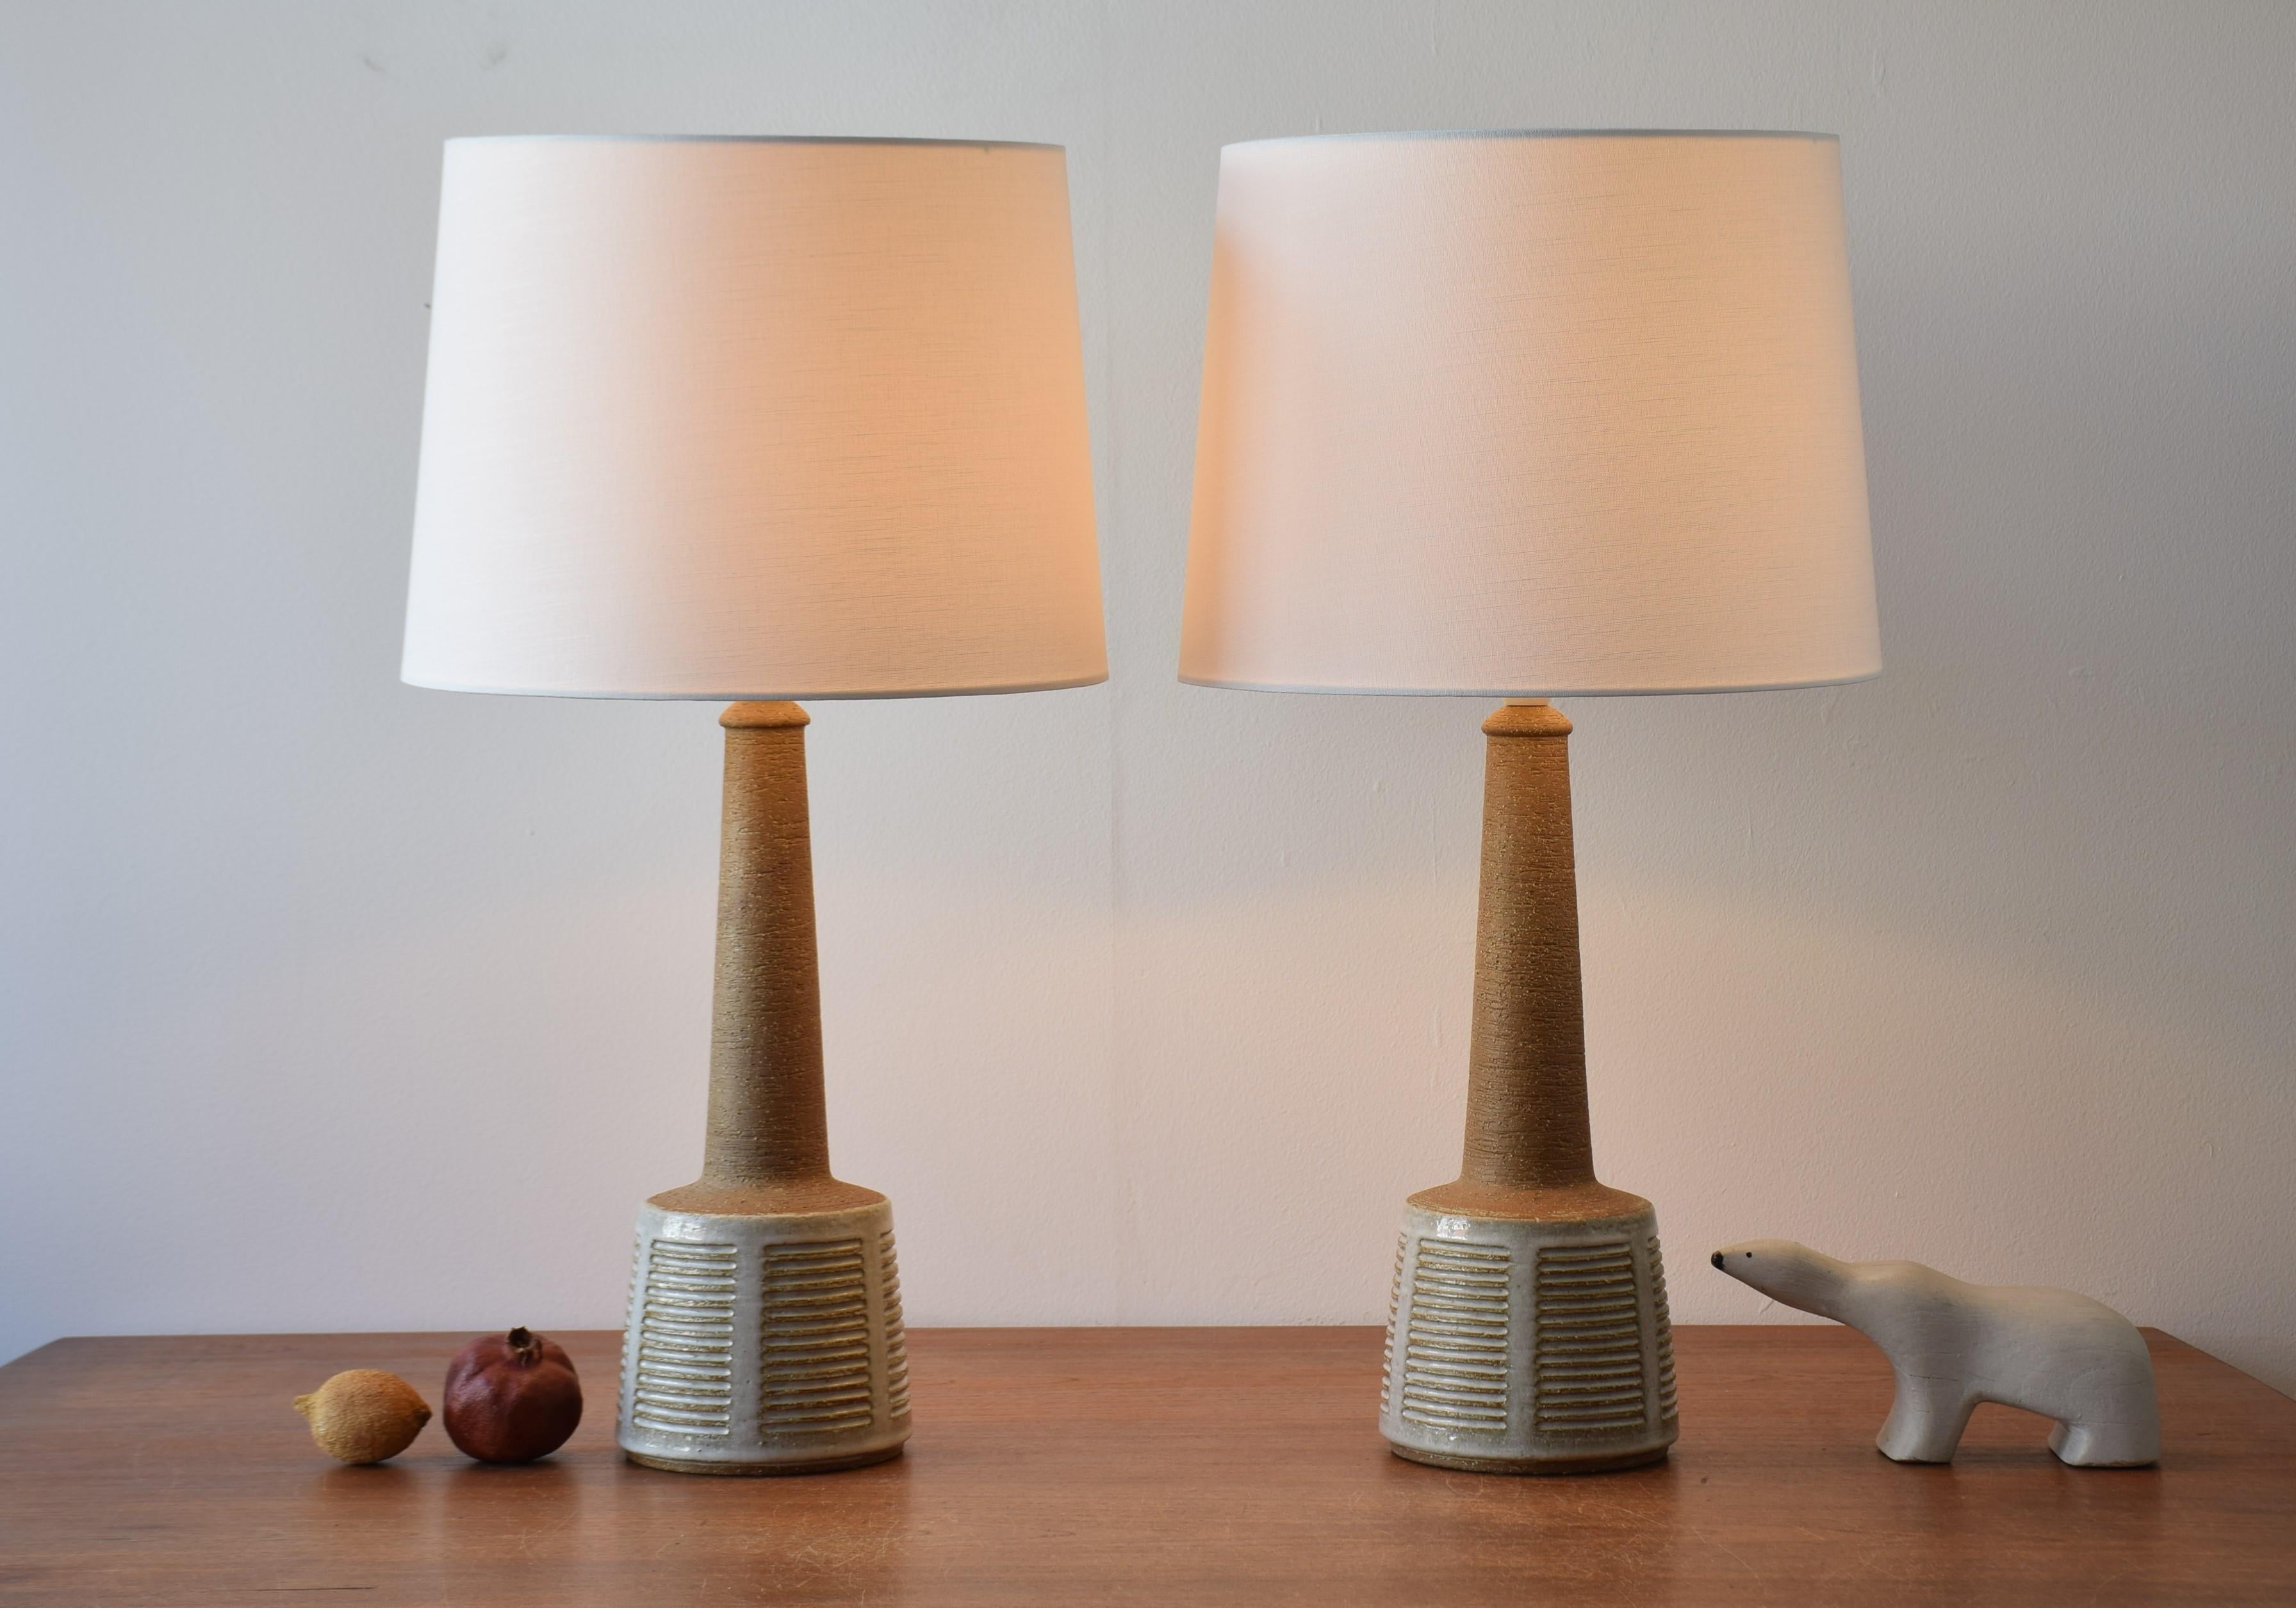 Pair of vintage Palshus Denmark tall ceramic lamps including new quality lampshades!

The lamps were made in cooperation with the Danish lamp manufacturer Le Klint and were designed by Esben Klint. They are manufactured circa 1960s. The lamps are